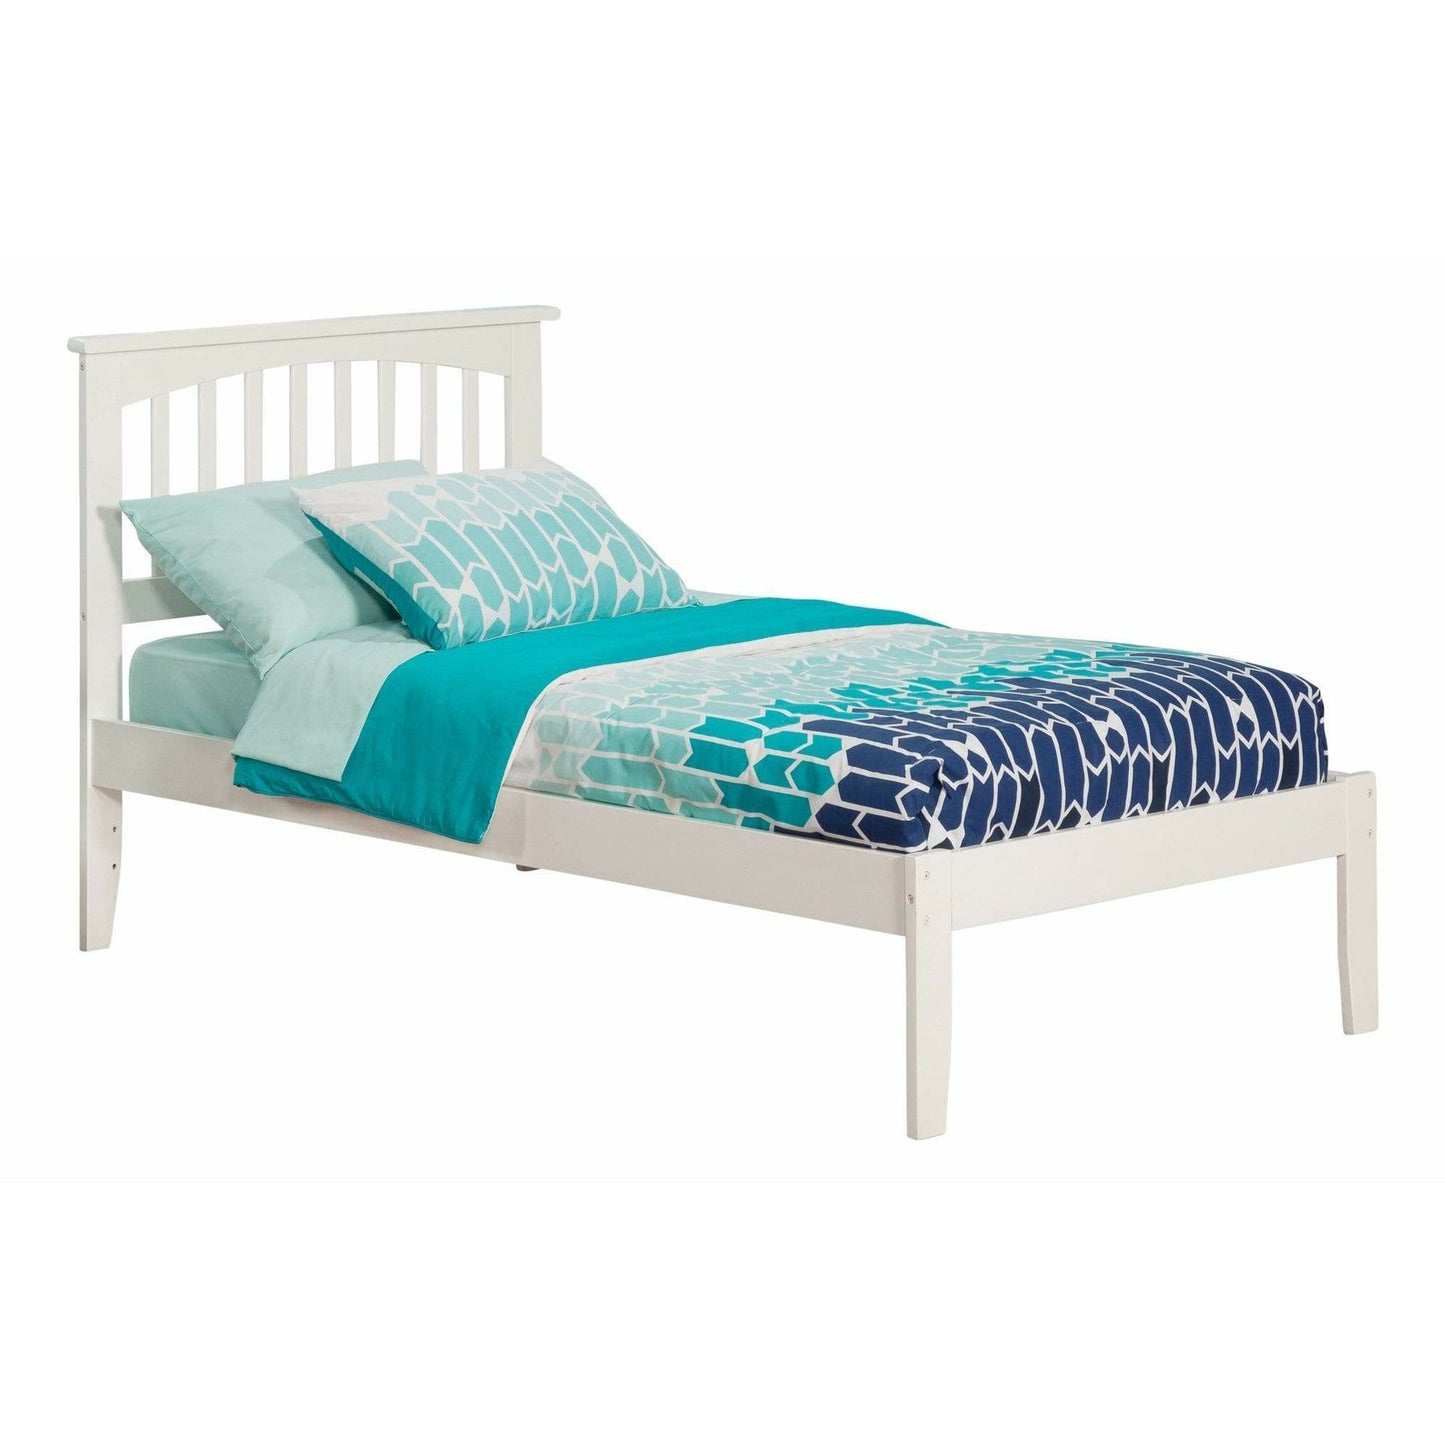 Atlantic Furniture Bed white Mission Twin XL Platform Bed with Open Foot Board in Espresso